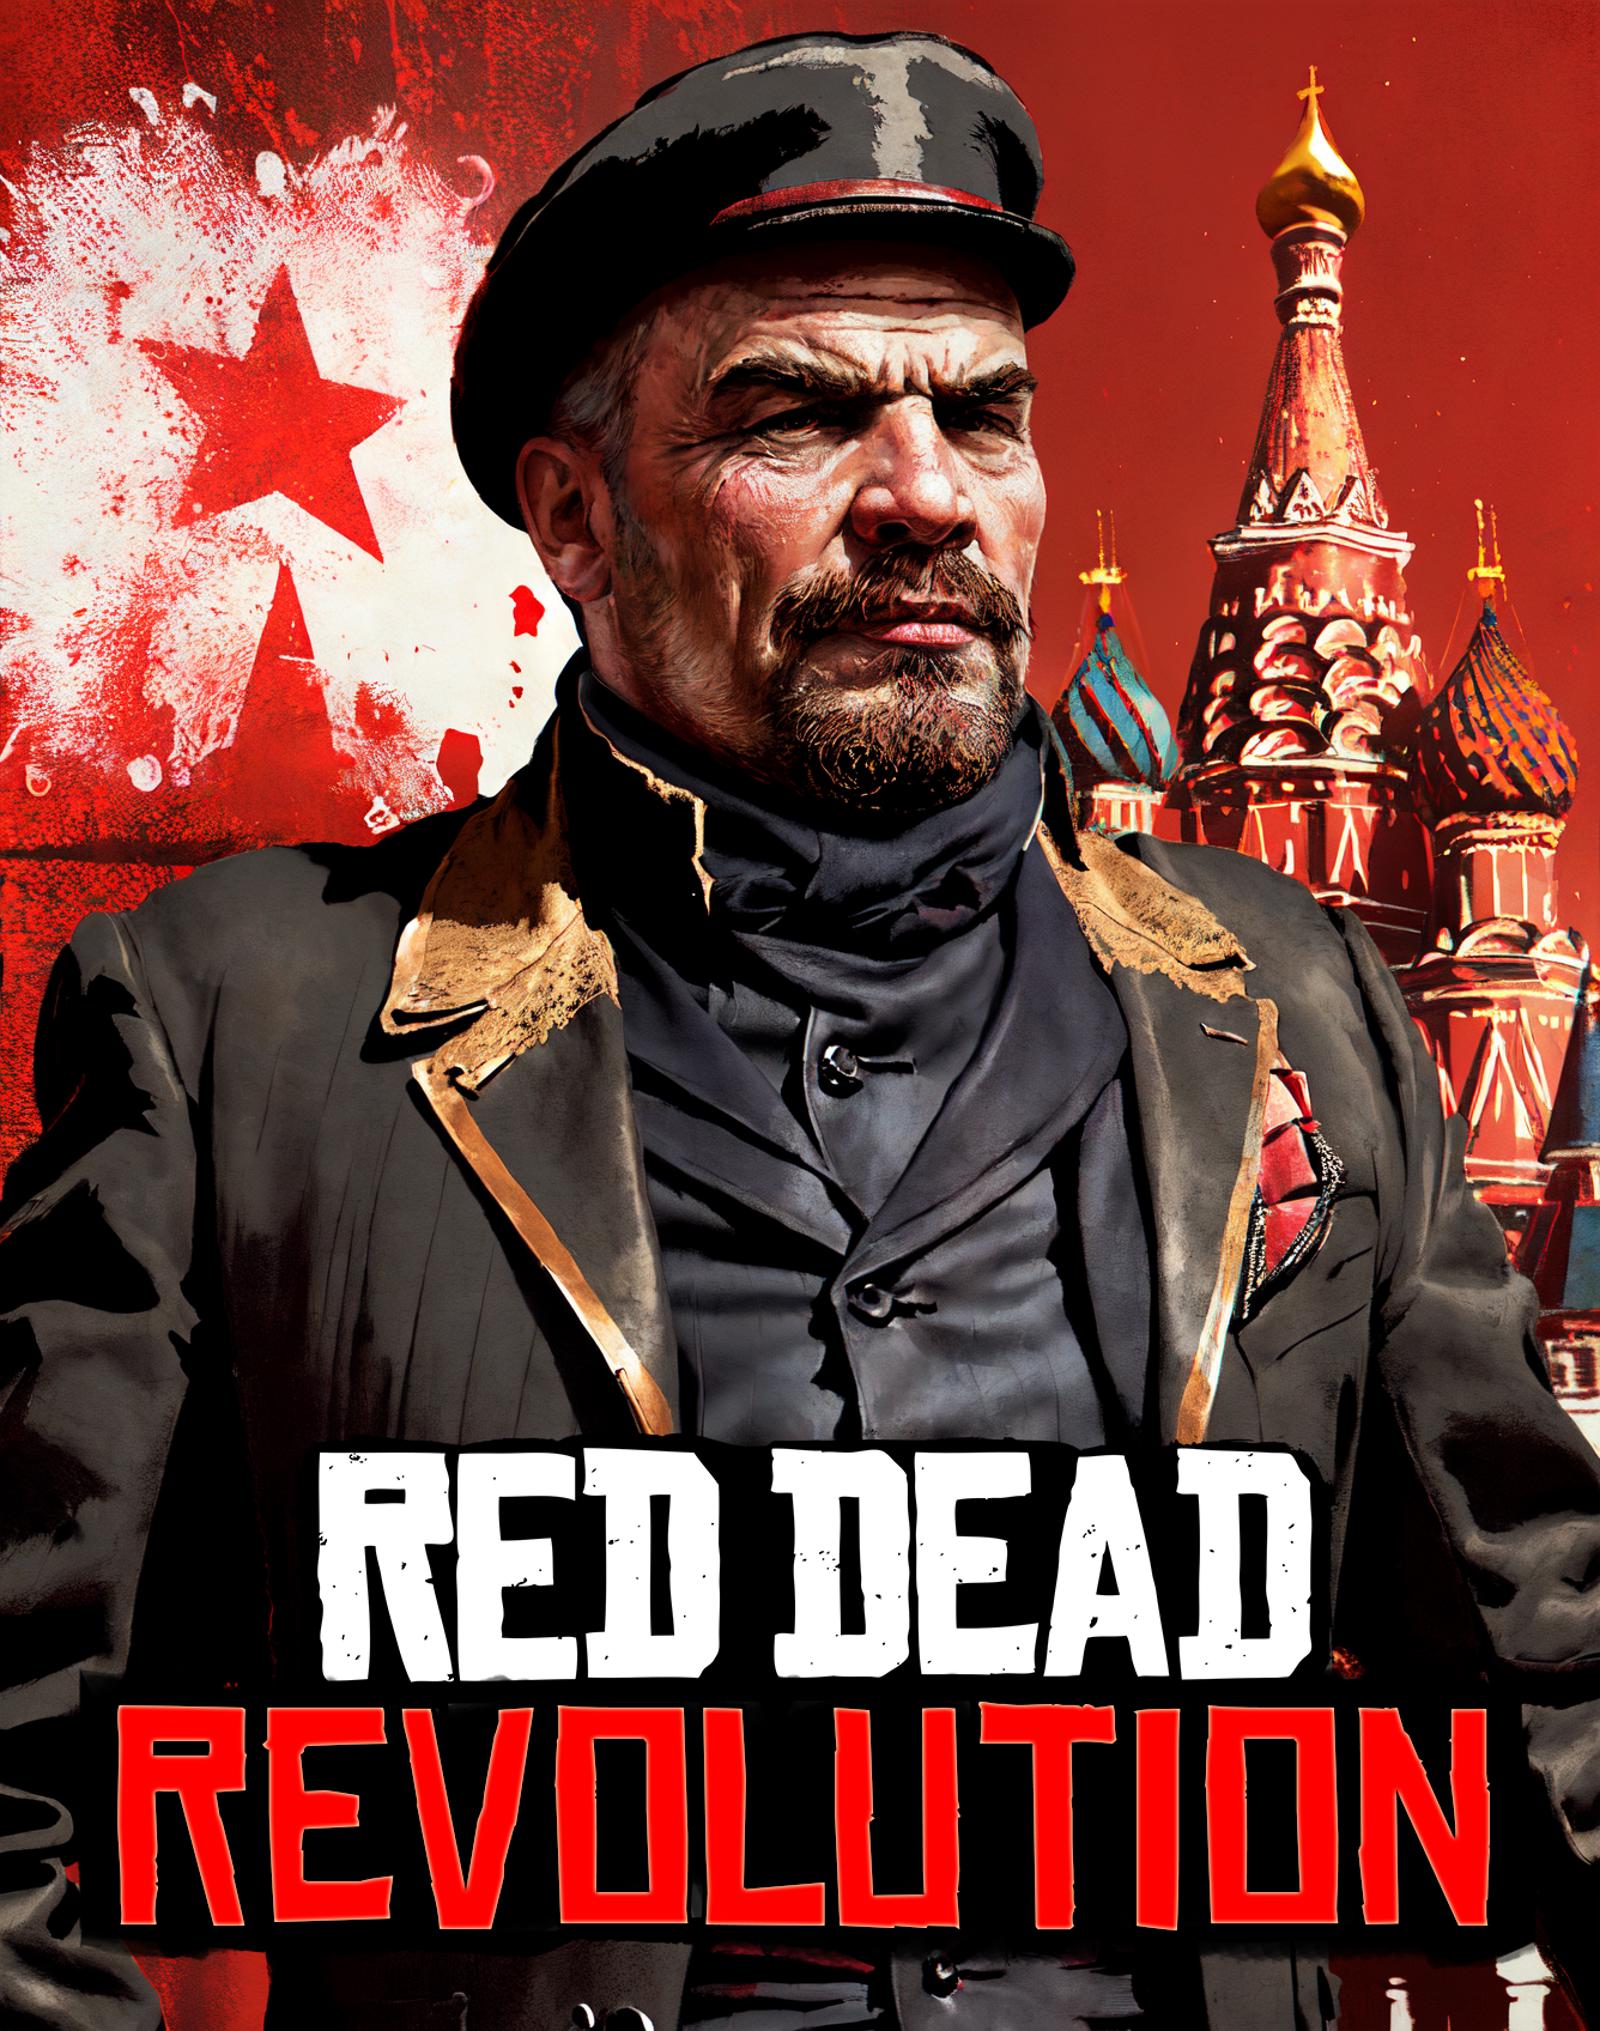 Red Dead Redemption 2 Game Poster Featuring a Man in a Hat and a Red Star.